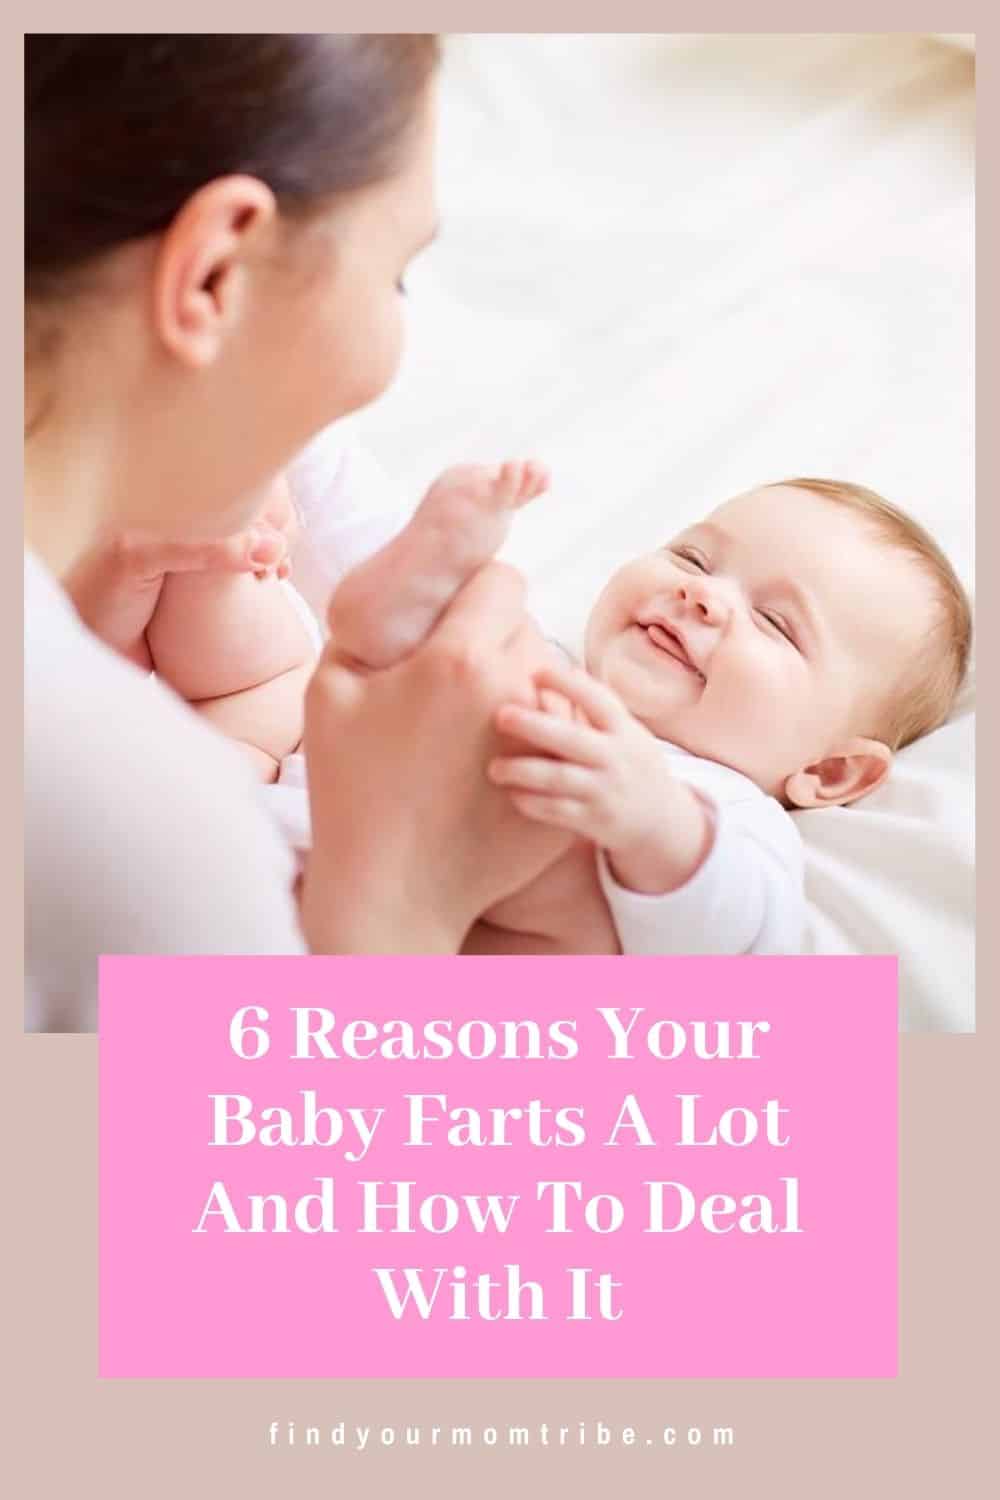 6 Reasons Your Baby Farts A Lot And How To Deal With It